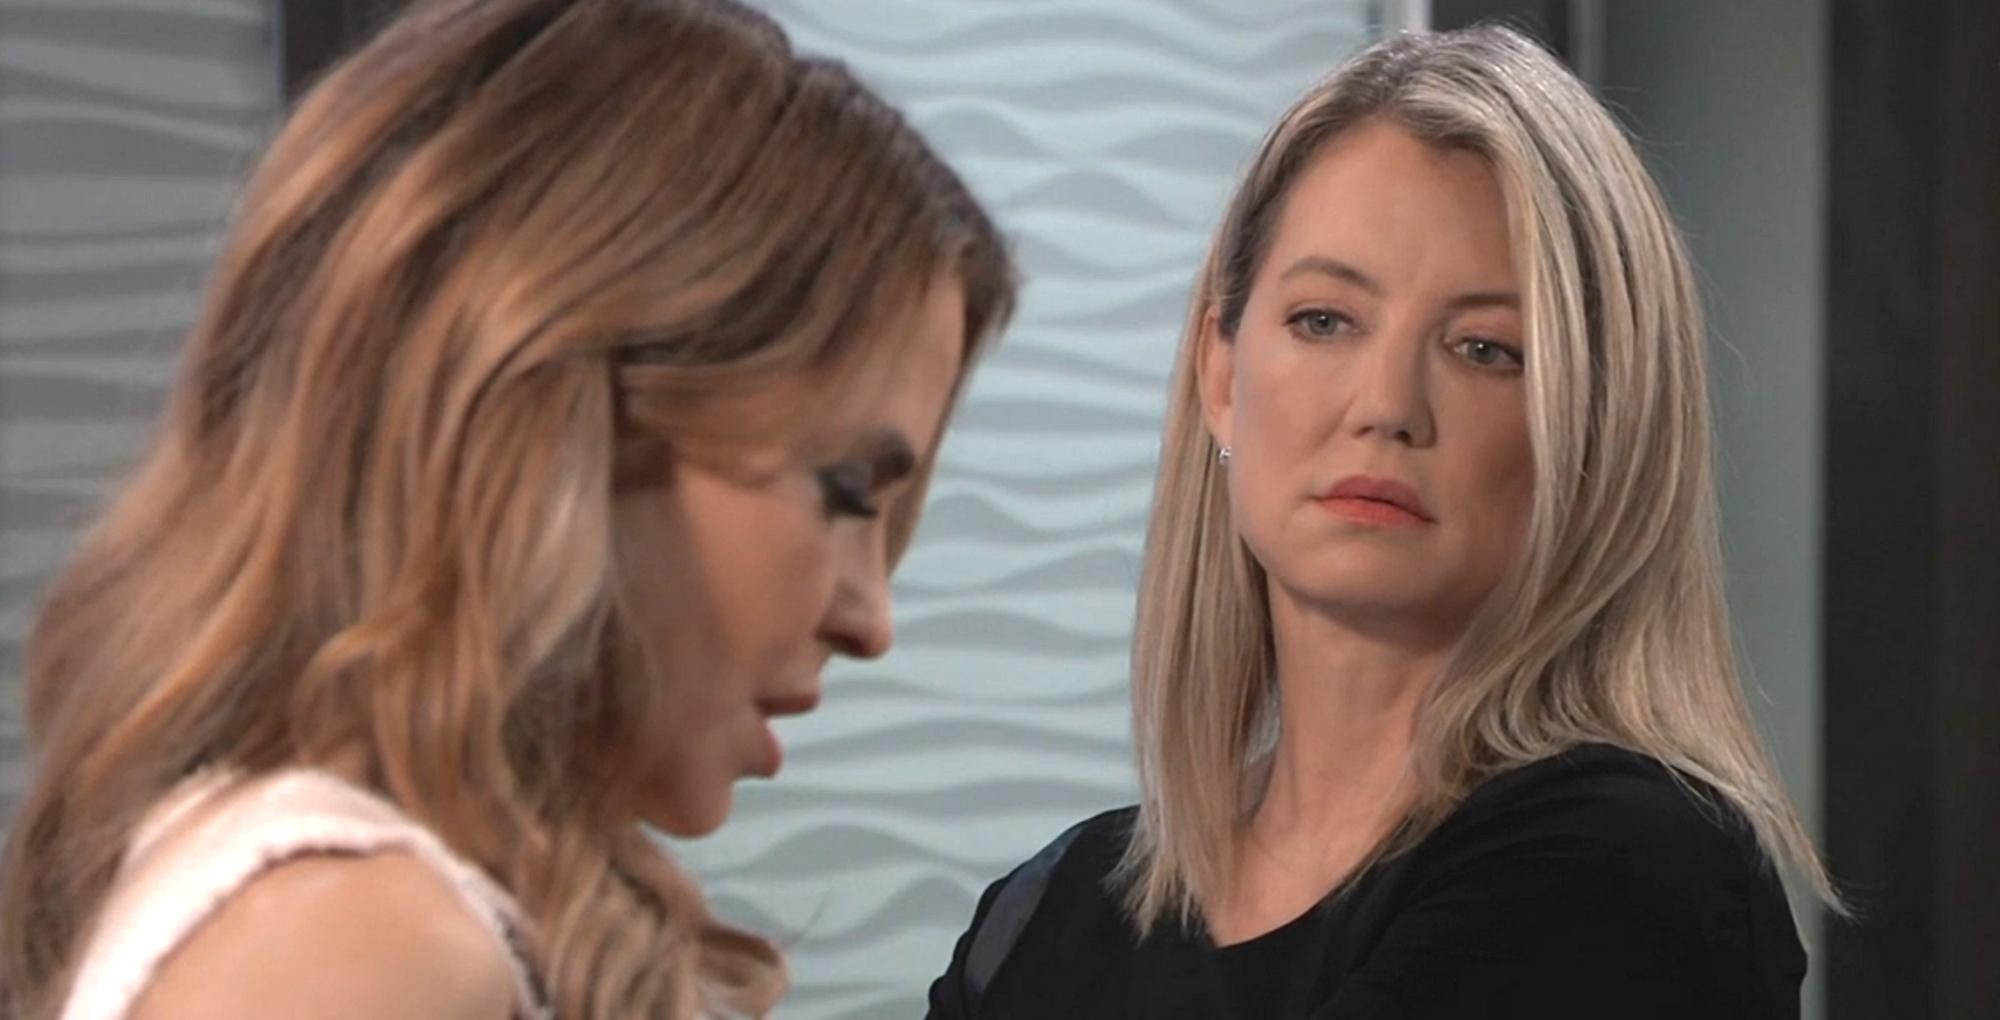 general hospital spoilers for may 30 2023 have nina giving olivia info.